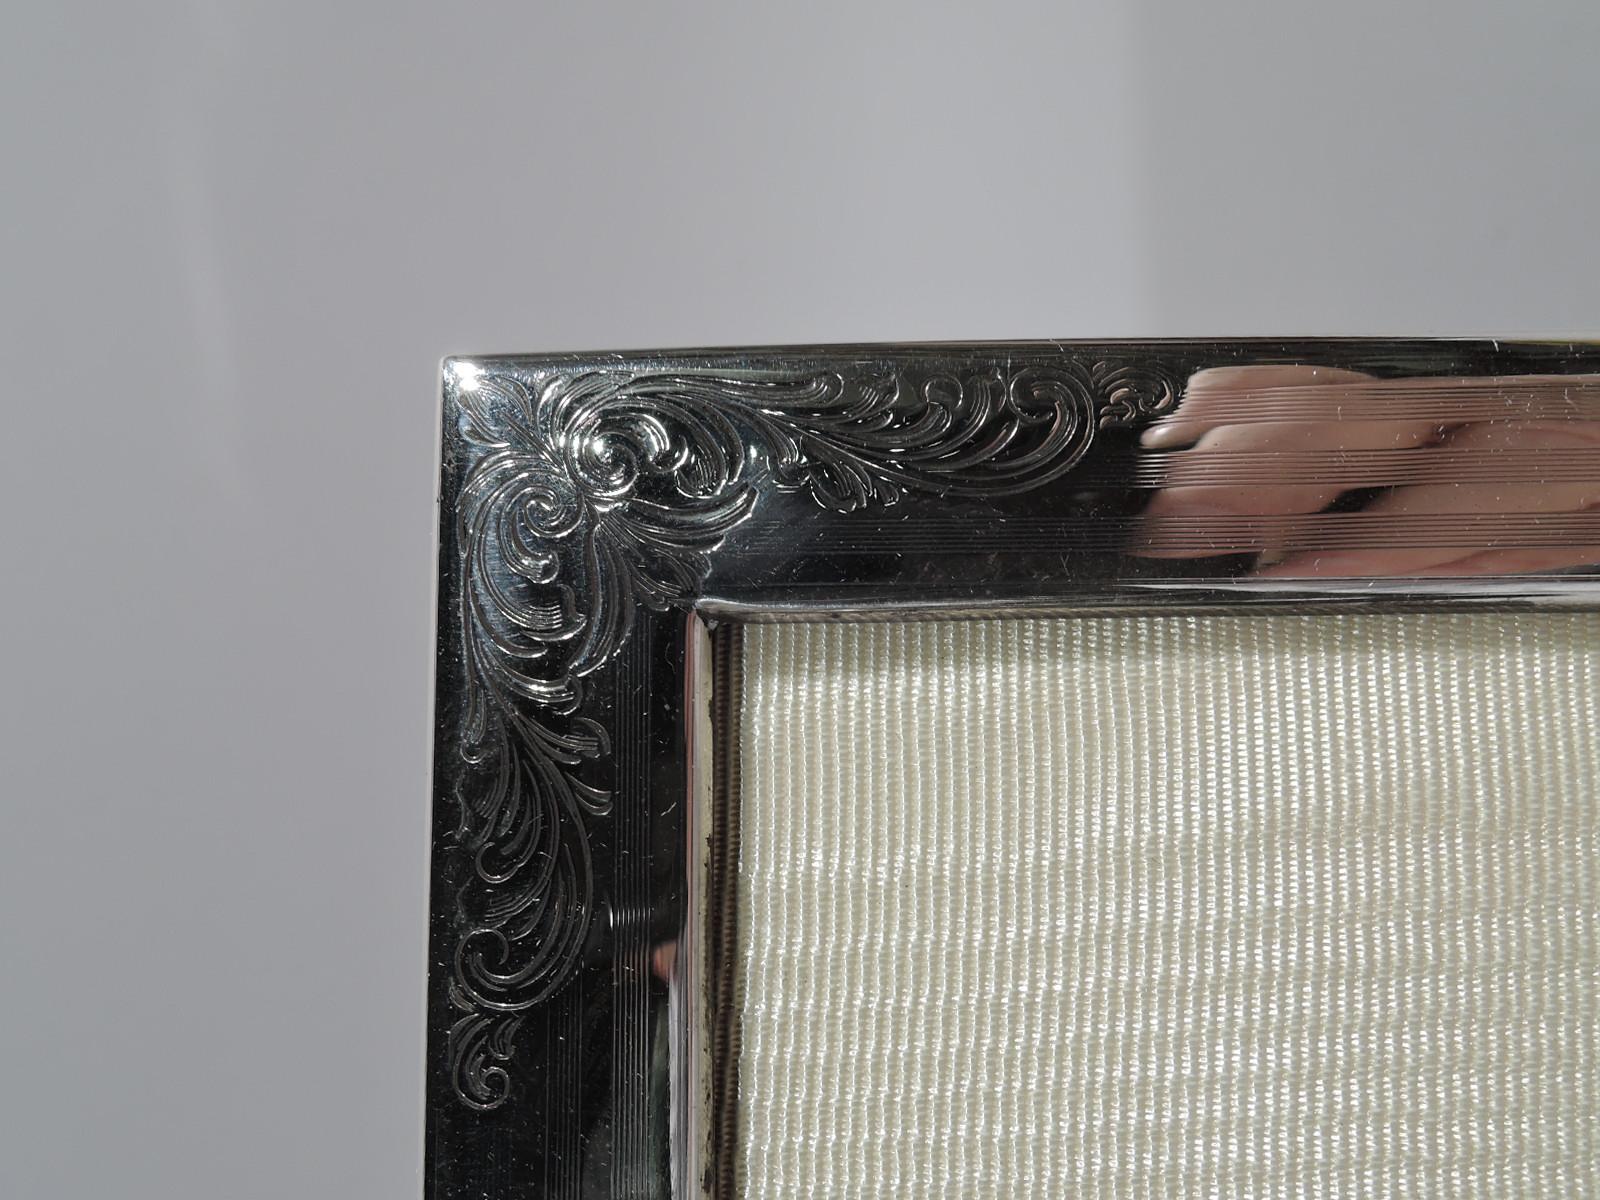 Edwardian sterling silver picture frame. Made by William B. Kerr in Newark, circa 1910. Rectangular window in surround with engine-turned wraparound pinstripes and engraved leafing scrolls at corners. Tubular cartouche (vacant). With glass, silk